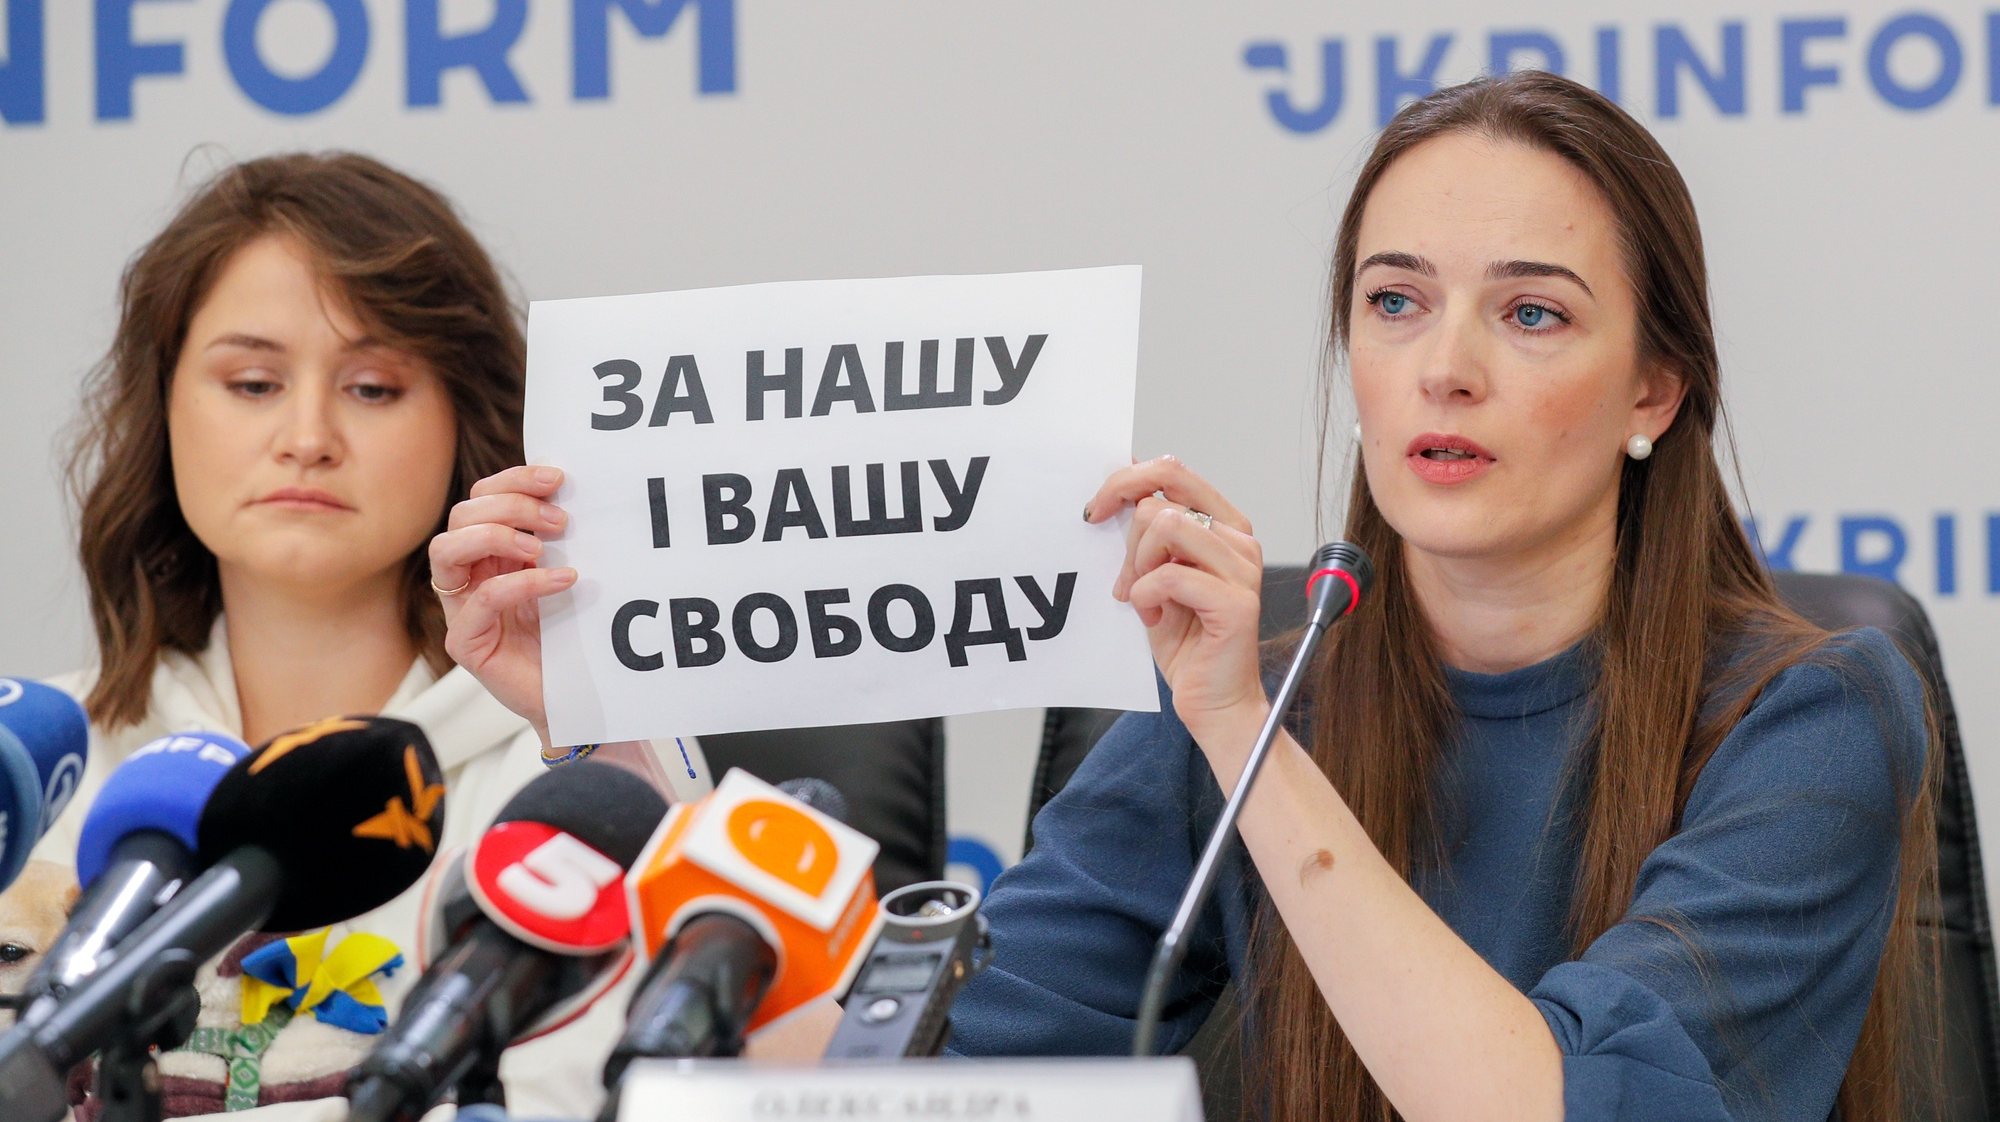 epa10230563 Oleksandra Matviychuk (R), Head of the Center for Civil Liberties, holds a sign reading &#039;For you and our freedom&#039; during a press conference in Kyiv (Kiev), Ukraine, 08 October 2022, after it was announced the organization is one of the three winners of the Nobel Peace Prize 2022. The Nobel Peace Prize 2022 has been awarded to human rights advocate Ales Bialiatski from Belarus, the Russian human rights organization Memorial and the Ukrainian human rights organization Center for Civil Liberties. The Norwegian Nobel Committee said in a statement on 07 October 2022, that by awarding the Nobel Peace Prize for 2022 to Bialiatski, Memorial and the Center for Civil Liberties, it wishes to &#039;honor three outstanding champions of human rights, democracy, and peaceful co-existence in the neighbor countries Belarus, Russia, and Ukraine.&#039;  EPA/SERGEY DOLZHENKO